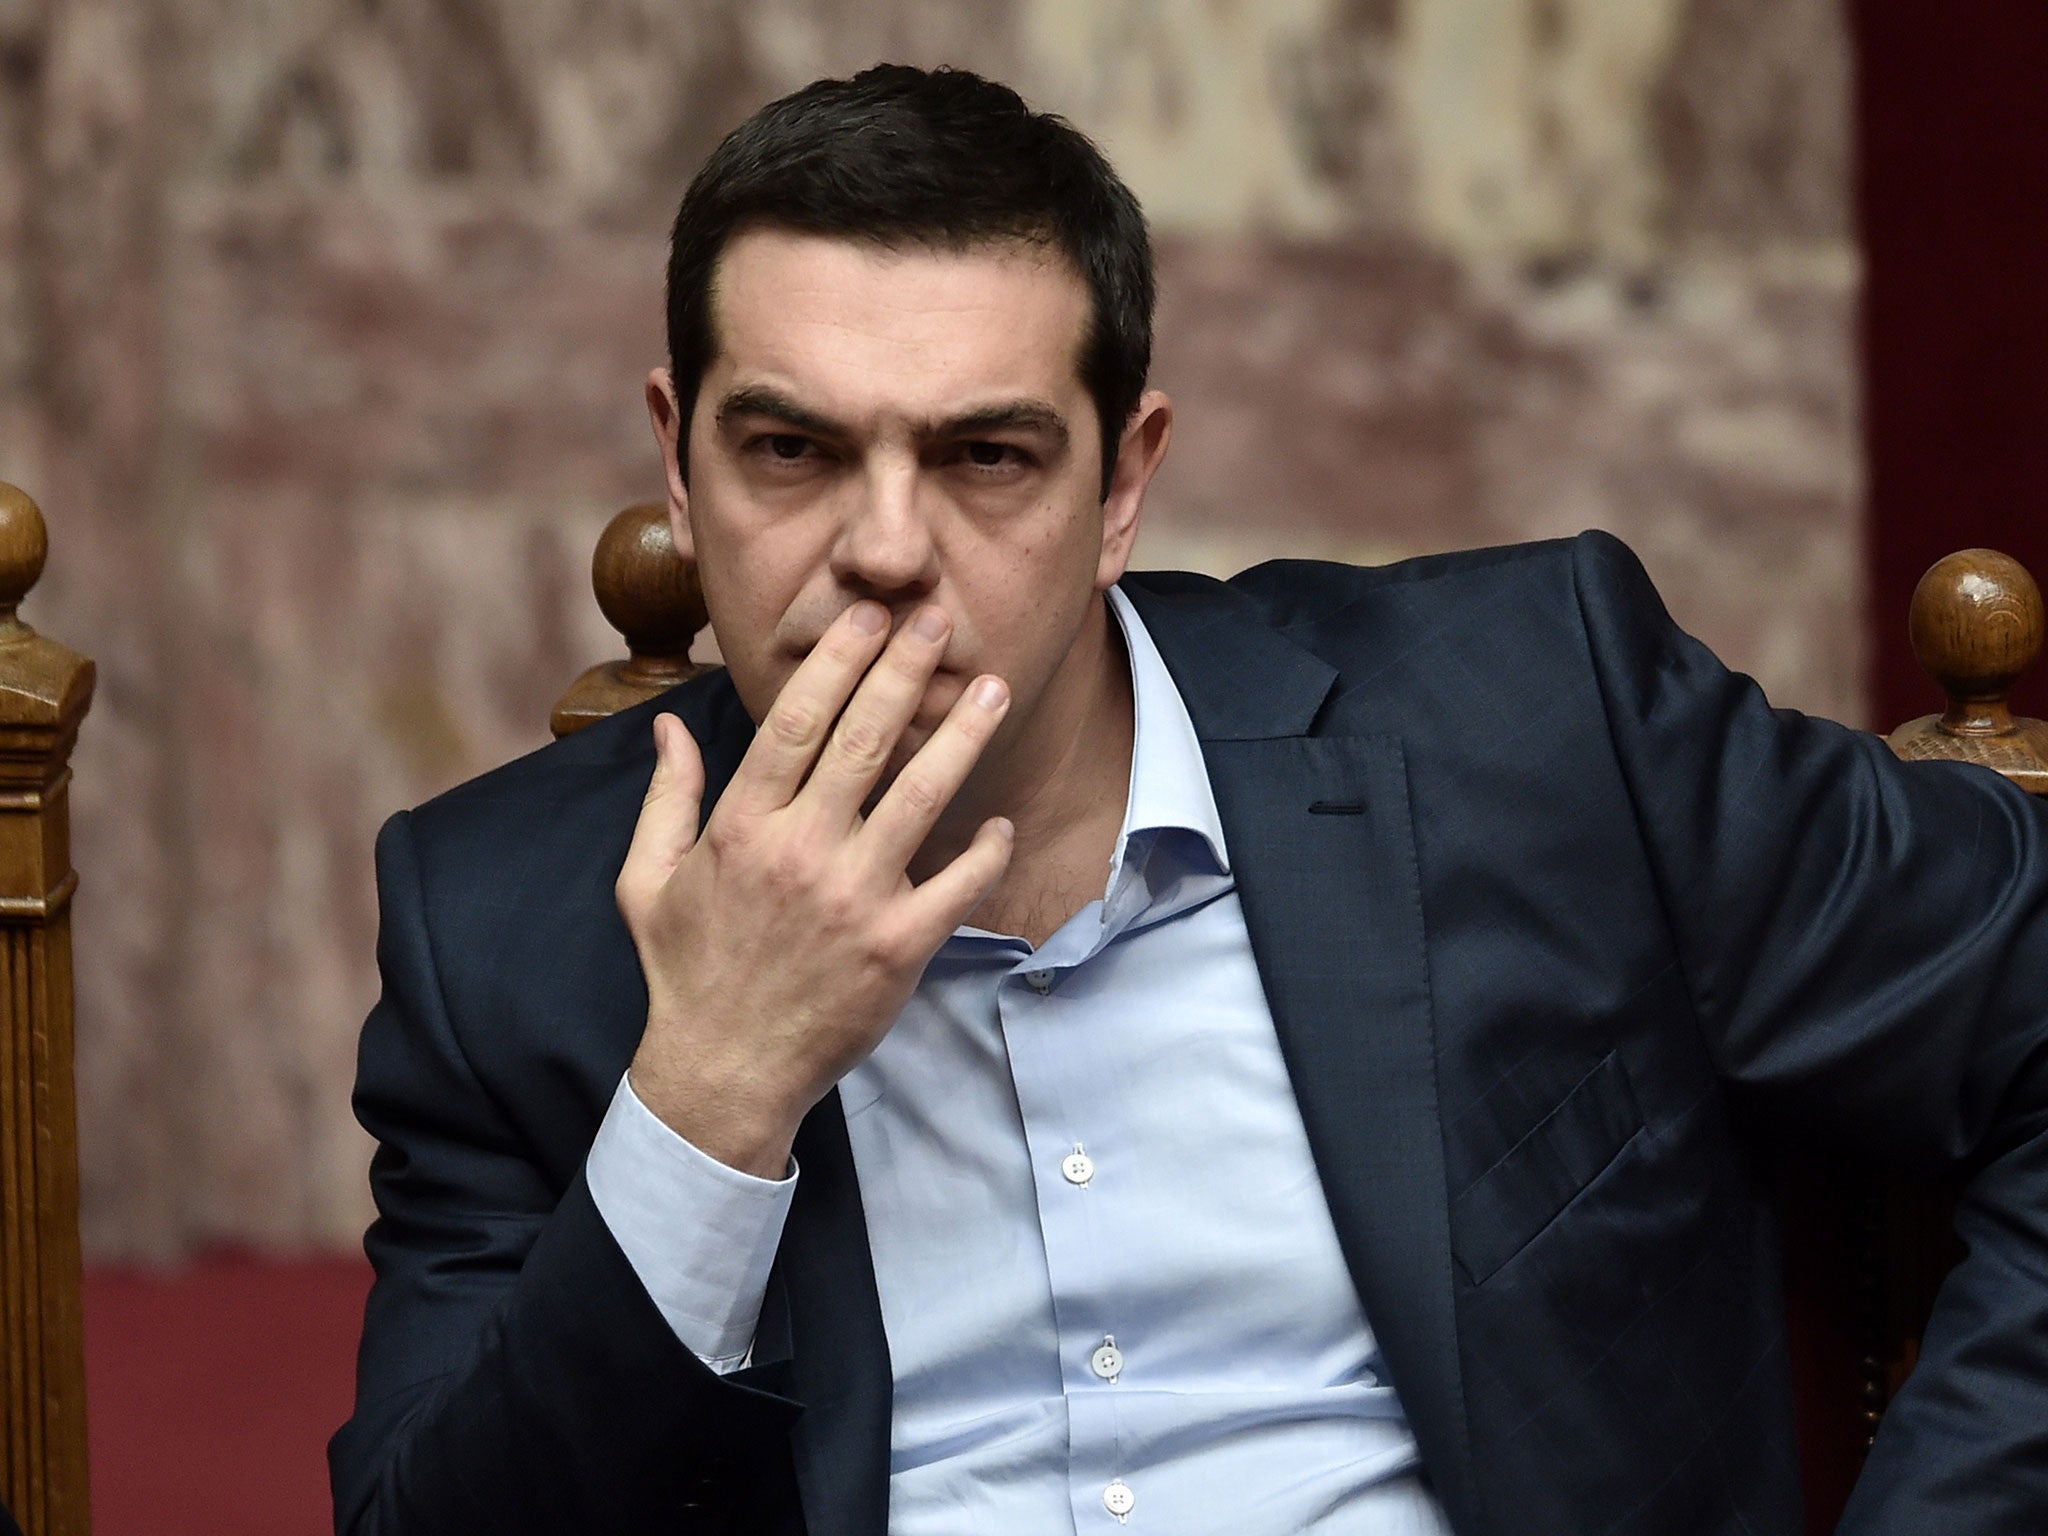 In the run-up to the referendum, Alexis Tsipras said the deal his European partners and the IMF wanted Athens to agree to was “humiliating” and “undemocratic” (Getty)